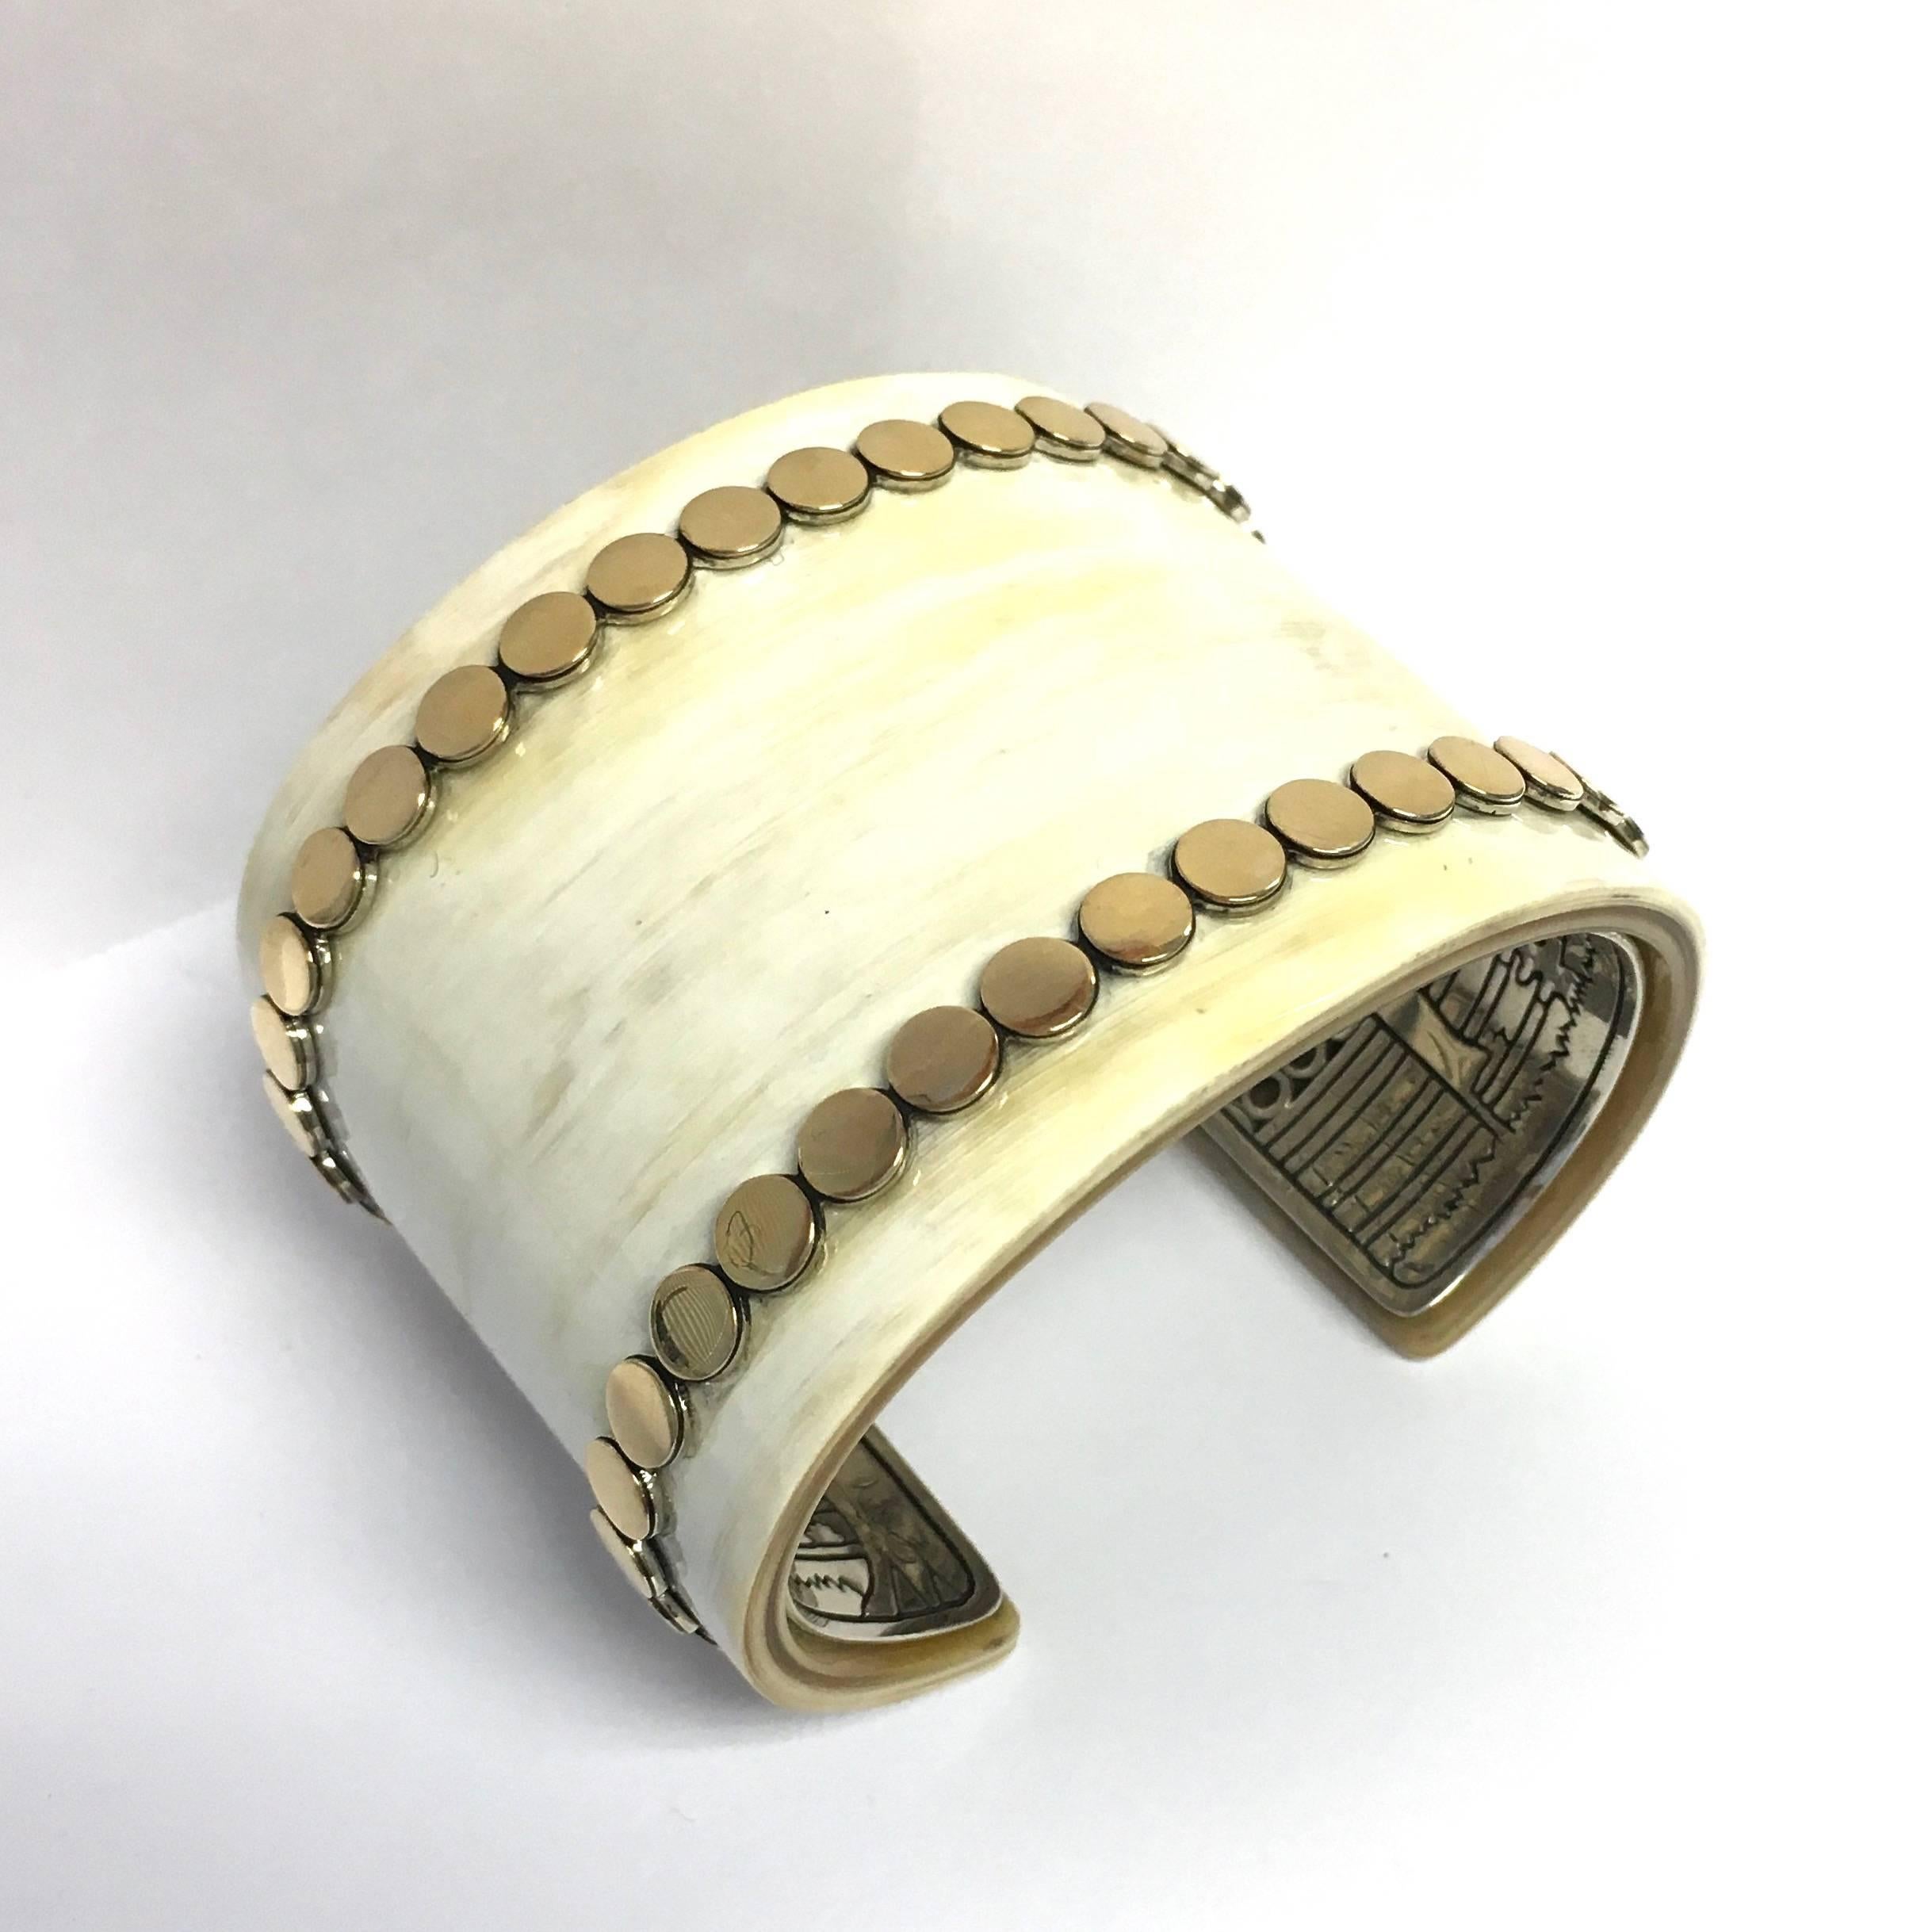 John Hardy Dot Buffalo Horn 18K Yellow Gold & Sterling Silver wide cuff b racelet. From the Dot Collection. Dots of 18k yellow gold trace the borders of a smooth, wide cuff of buffalo horn to impart their radiant gleam, the design set upon a